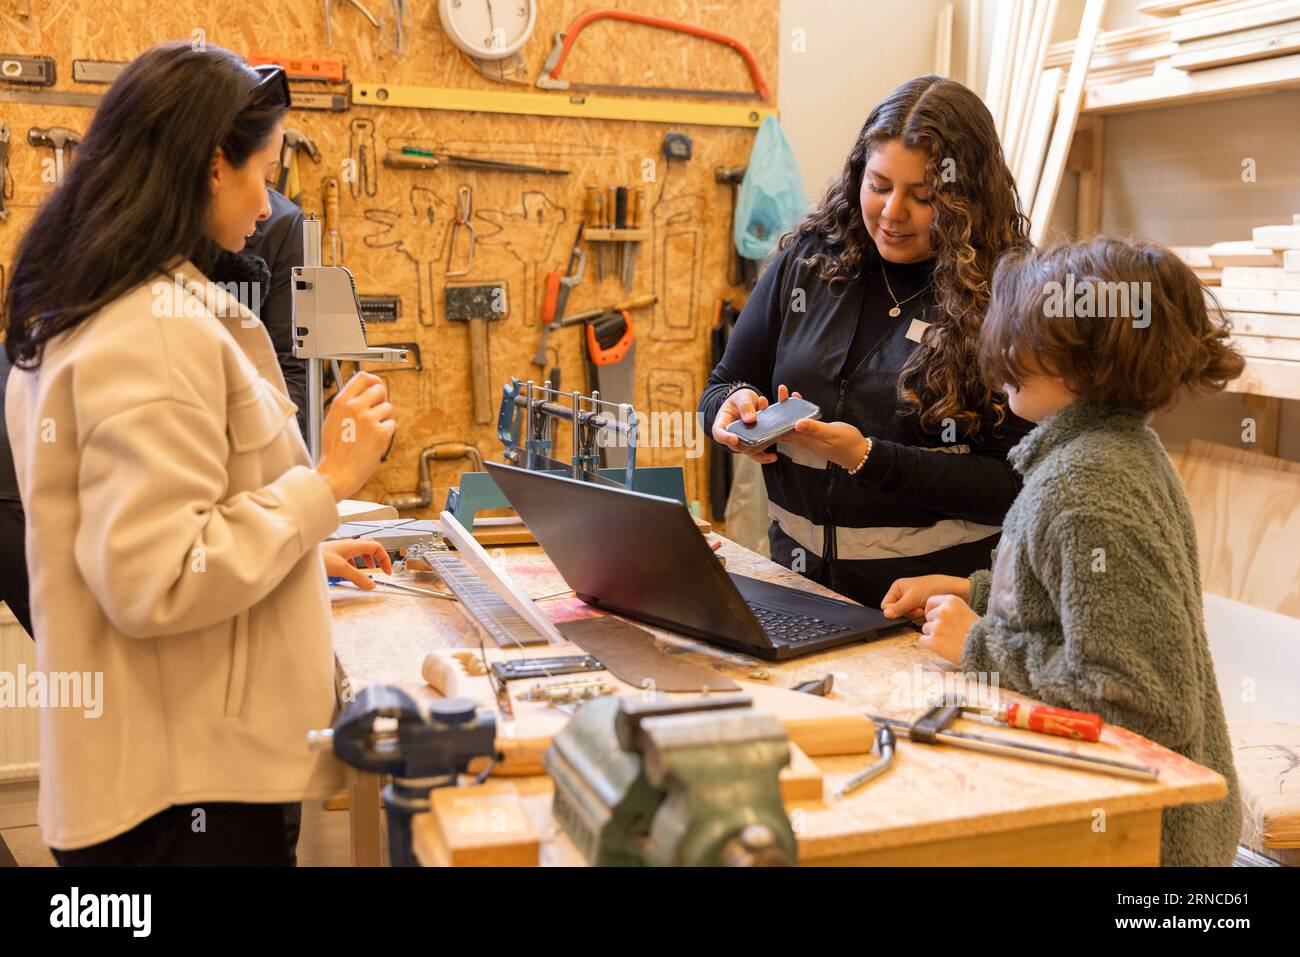 Female technician discussing over electronic goods with boy at recycling center Stock Photo